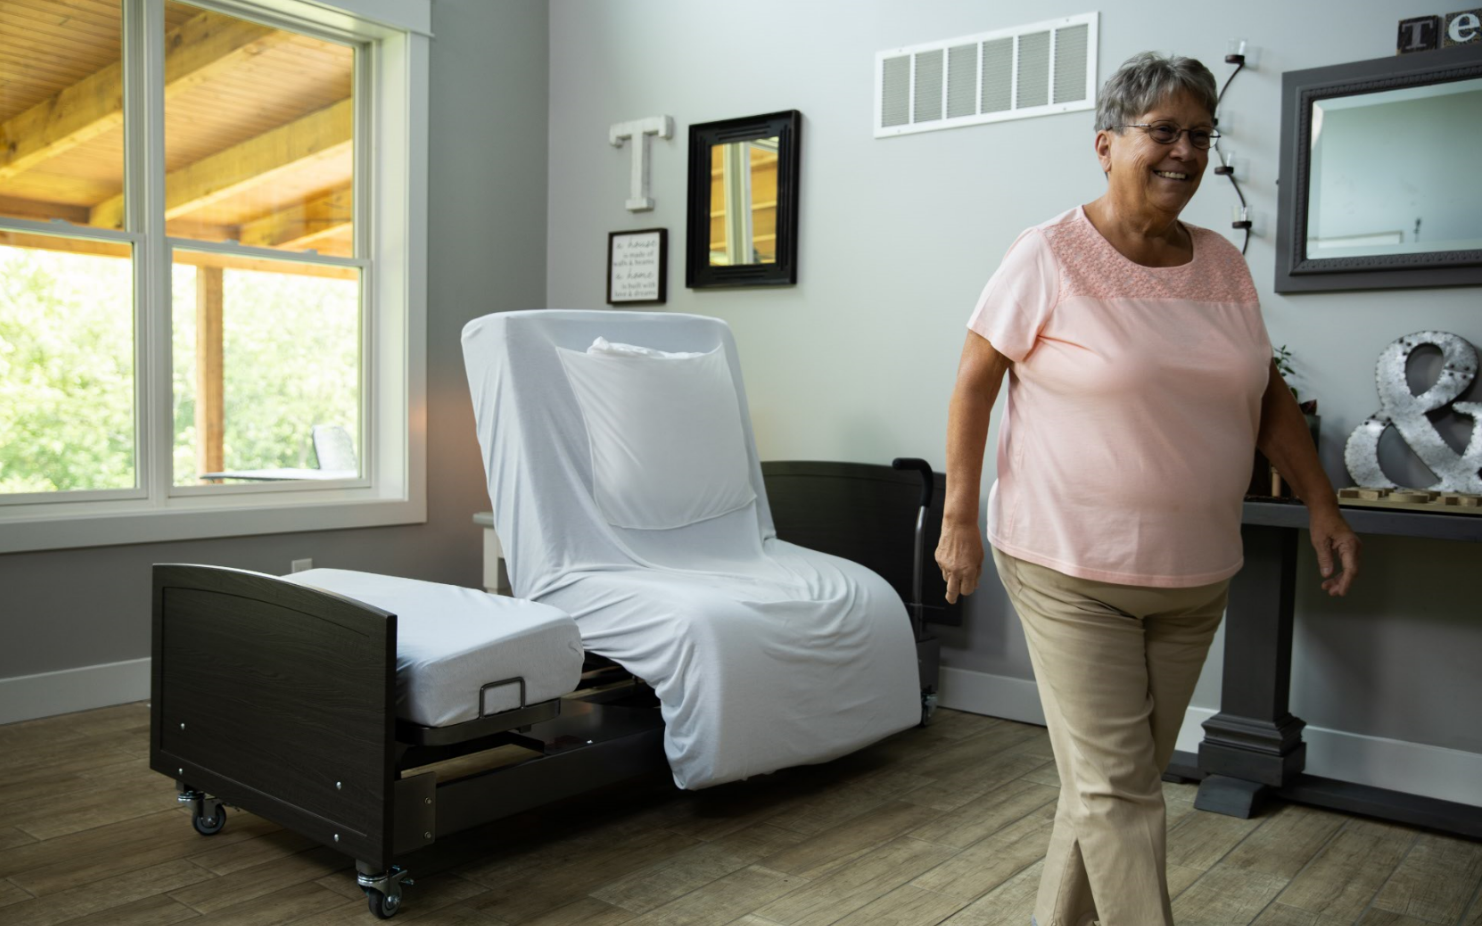 Image of the ActiveCare Fixed Height Bed and woman walking away from it.